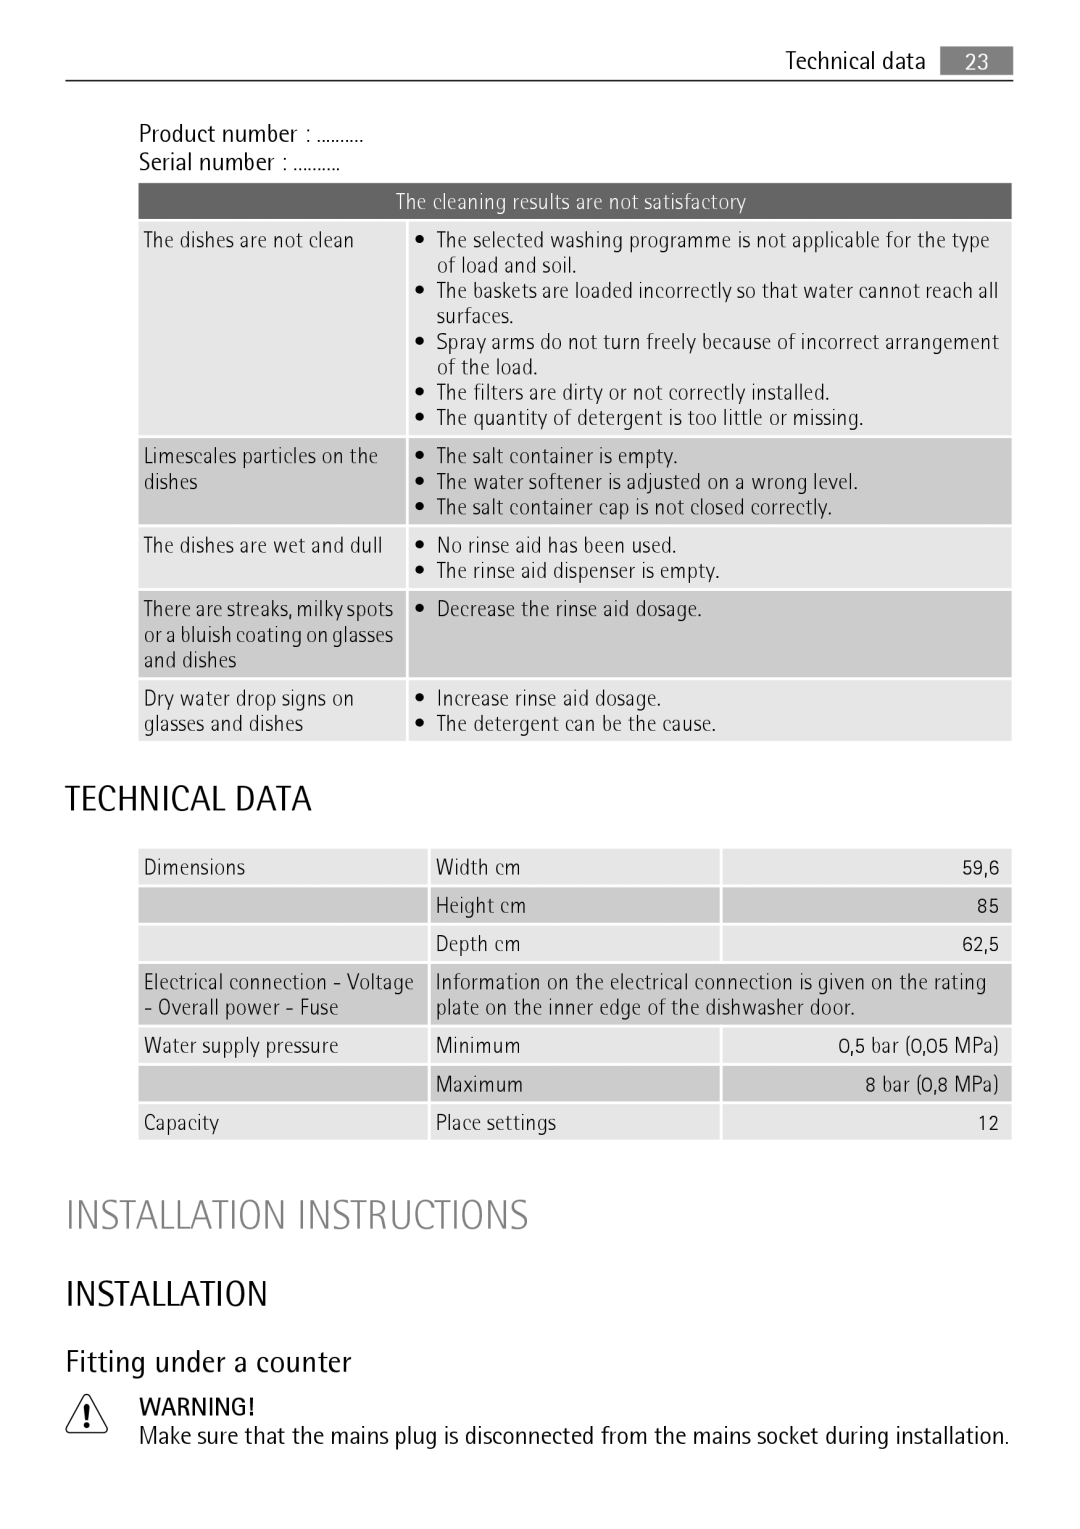 AEG 45003 Installation Instructions, Technical Data, Fitting under a counter, The cleaning results are not satisfactory 